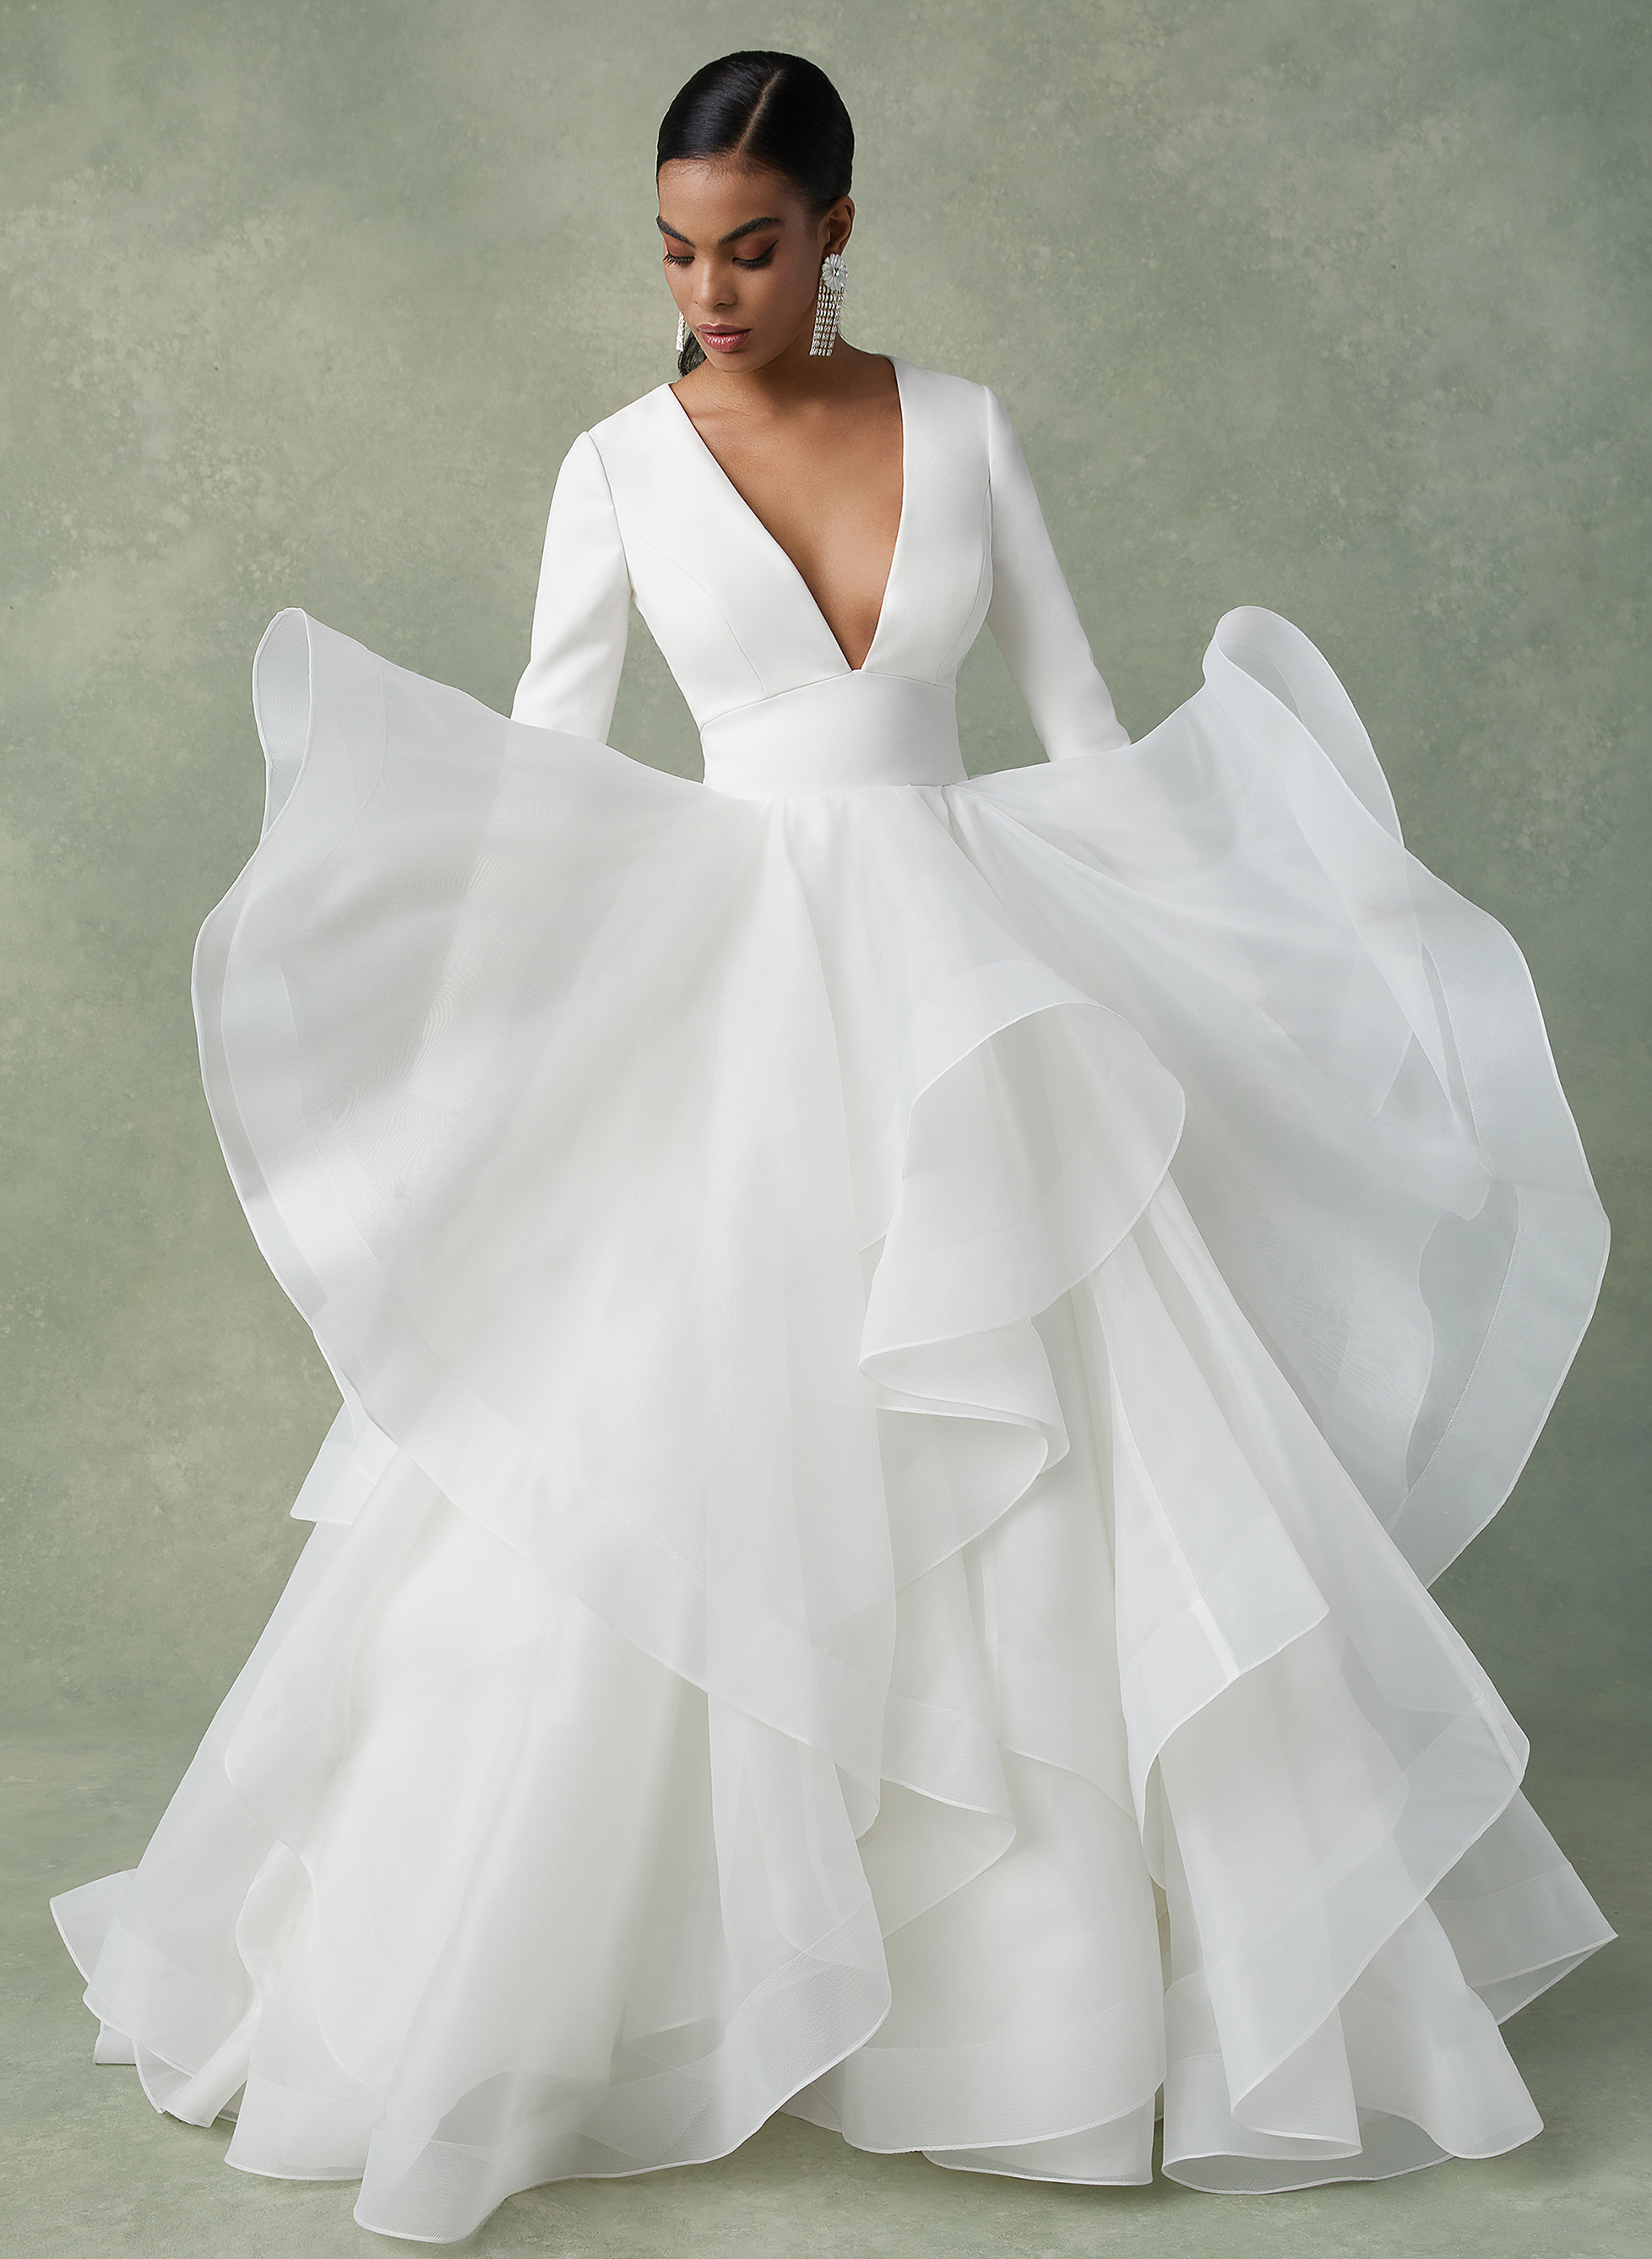 Long Sleeves Ball-Gown Wedding Dresses With Cascading Ruffles 